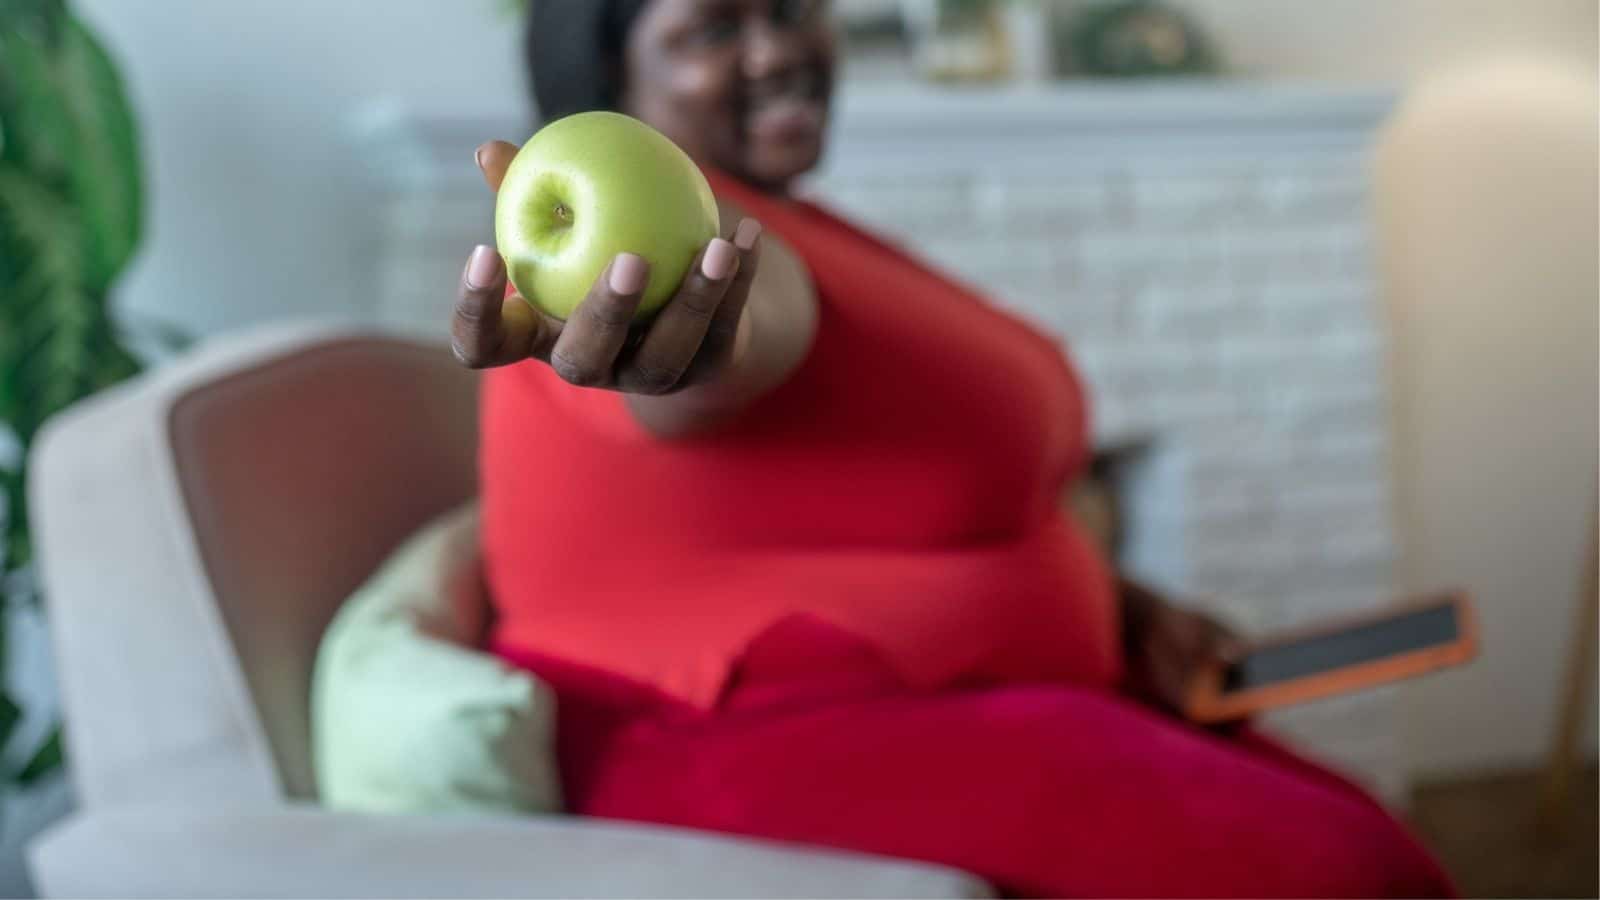 Pink Lady and Bravo apples among the healthiest, study finds 